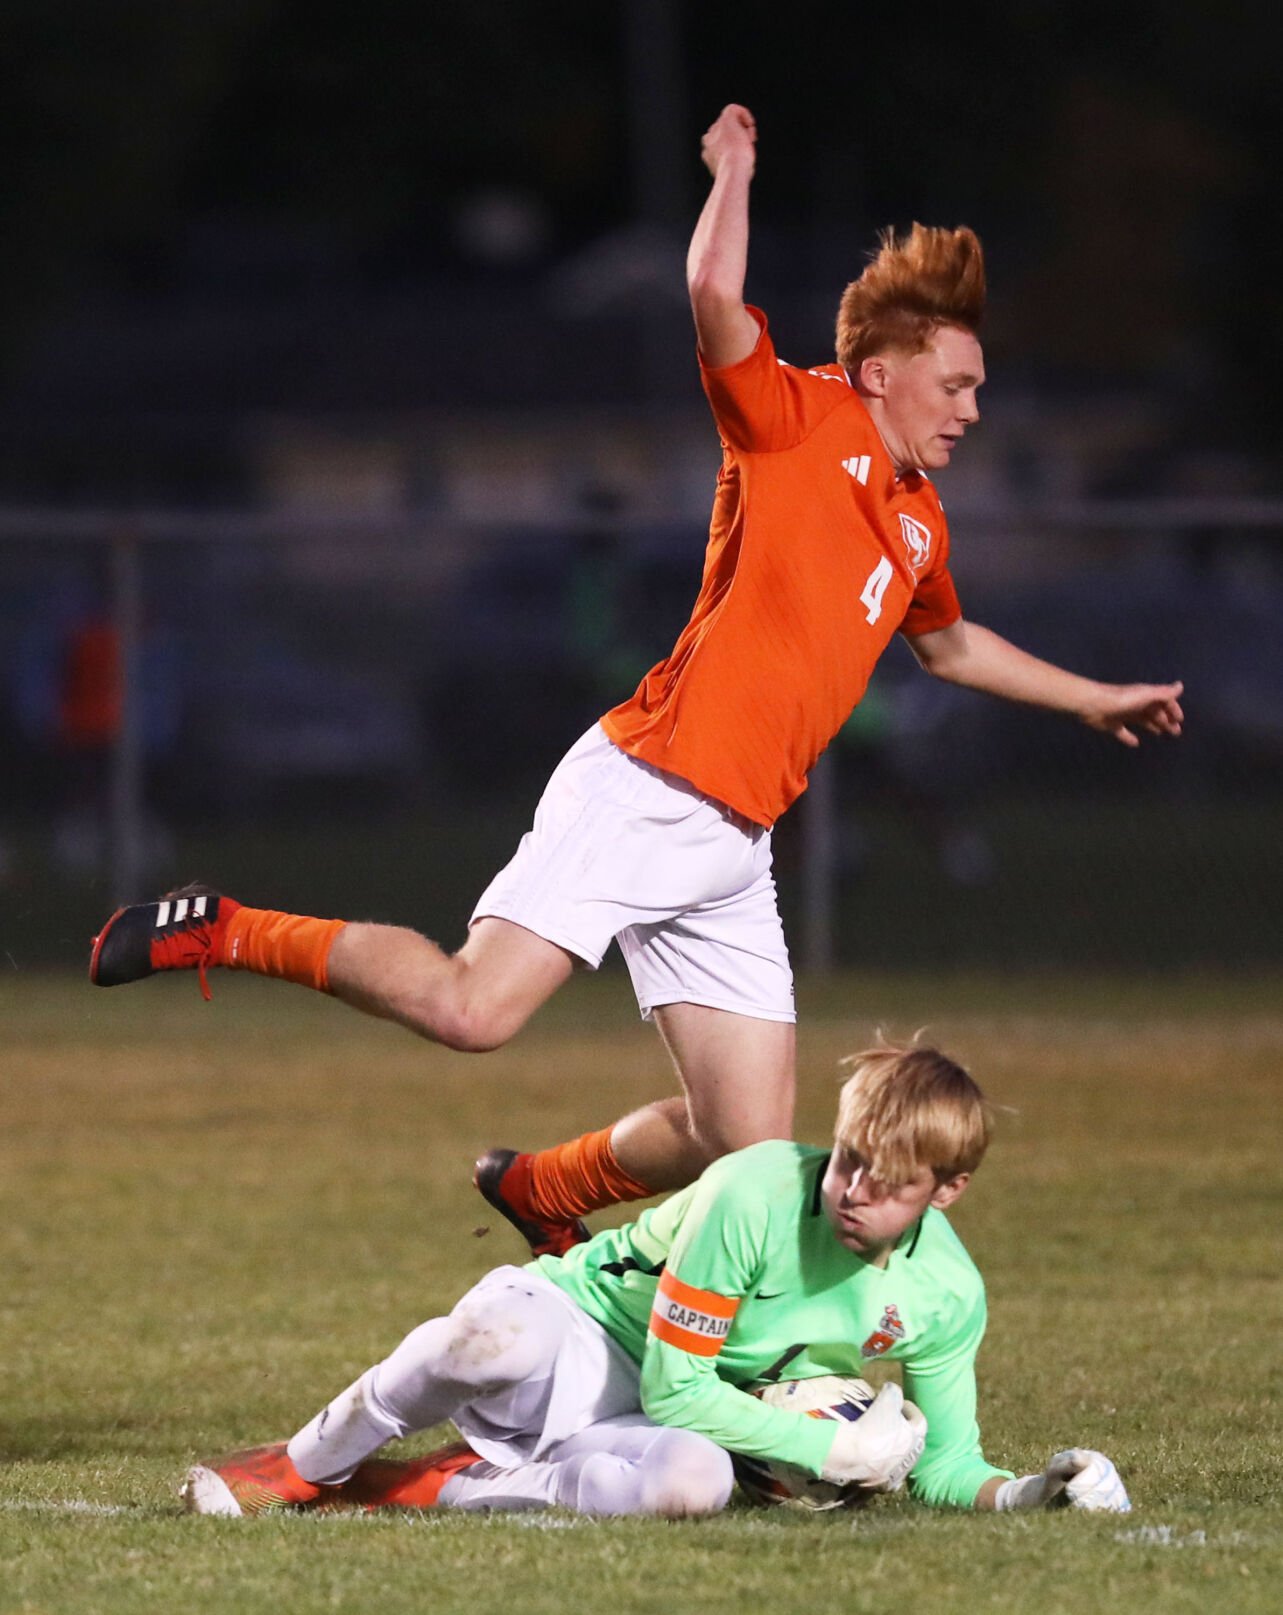 Normal Community High School Clinches Class 3A Soccer Regional Championship with Tough Defensive Win